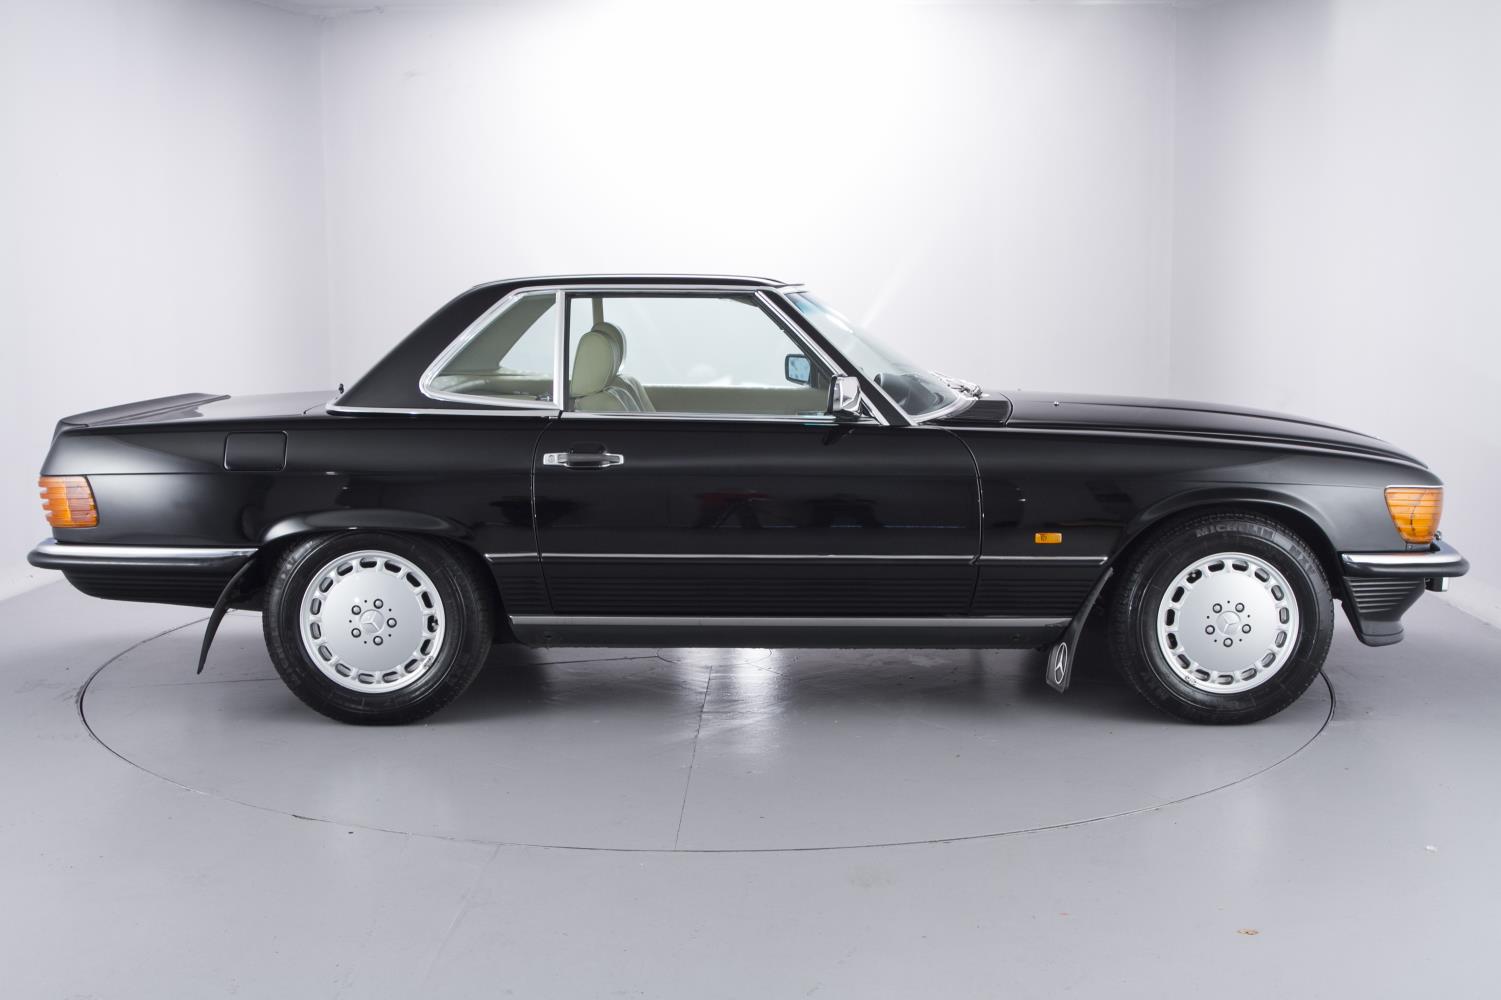 1989 Mercedes-Benz 500 SL With 965 Miles On The Clock Is ...